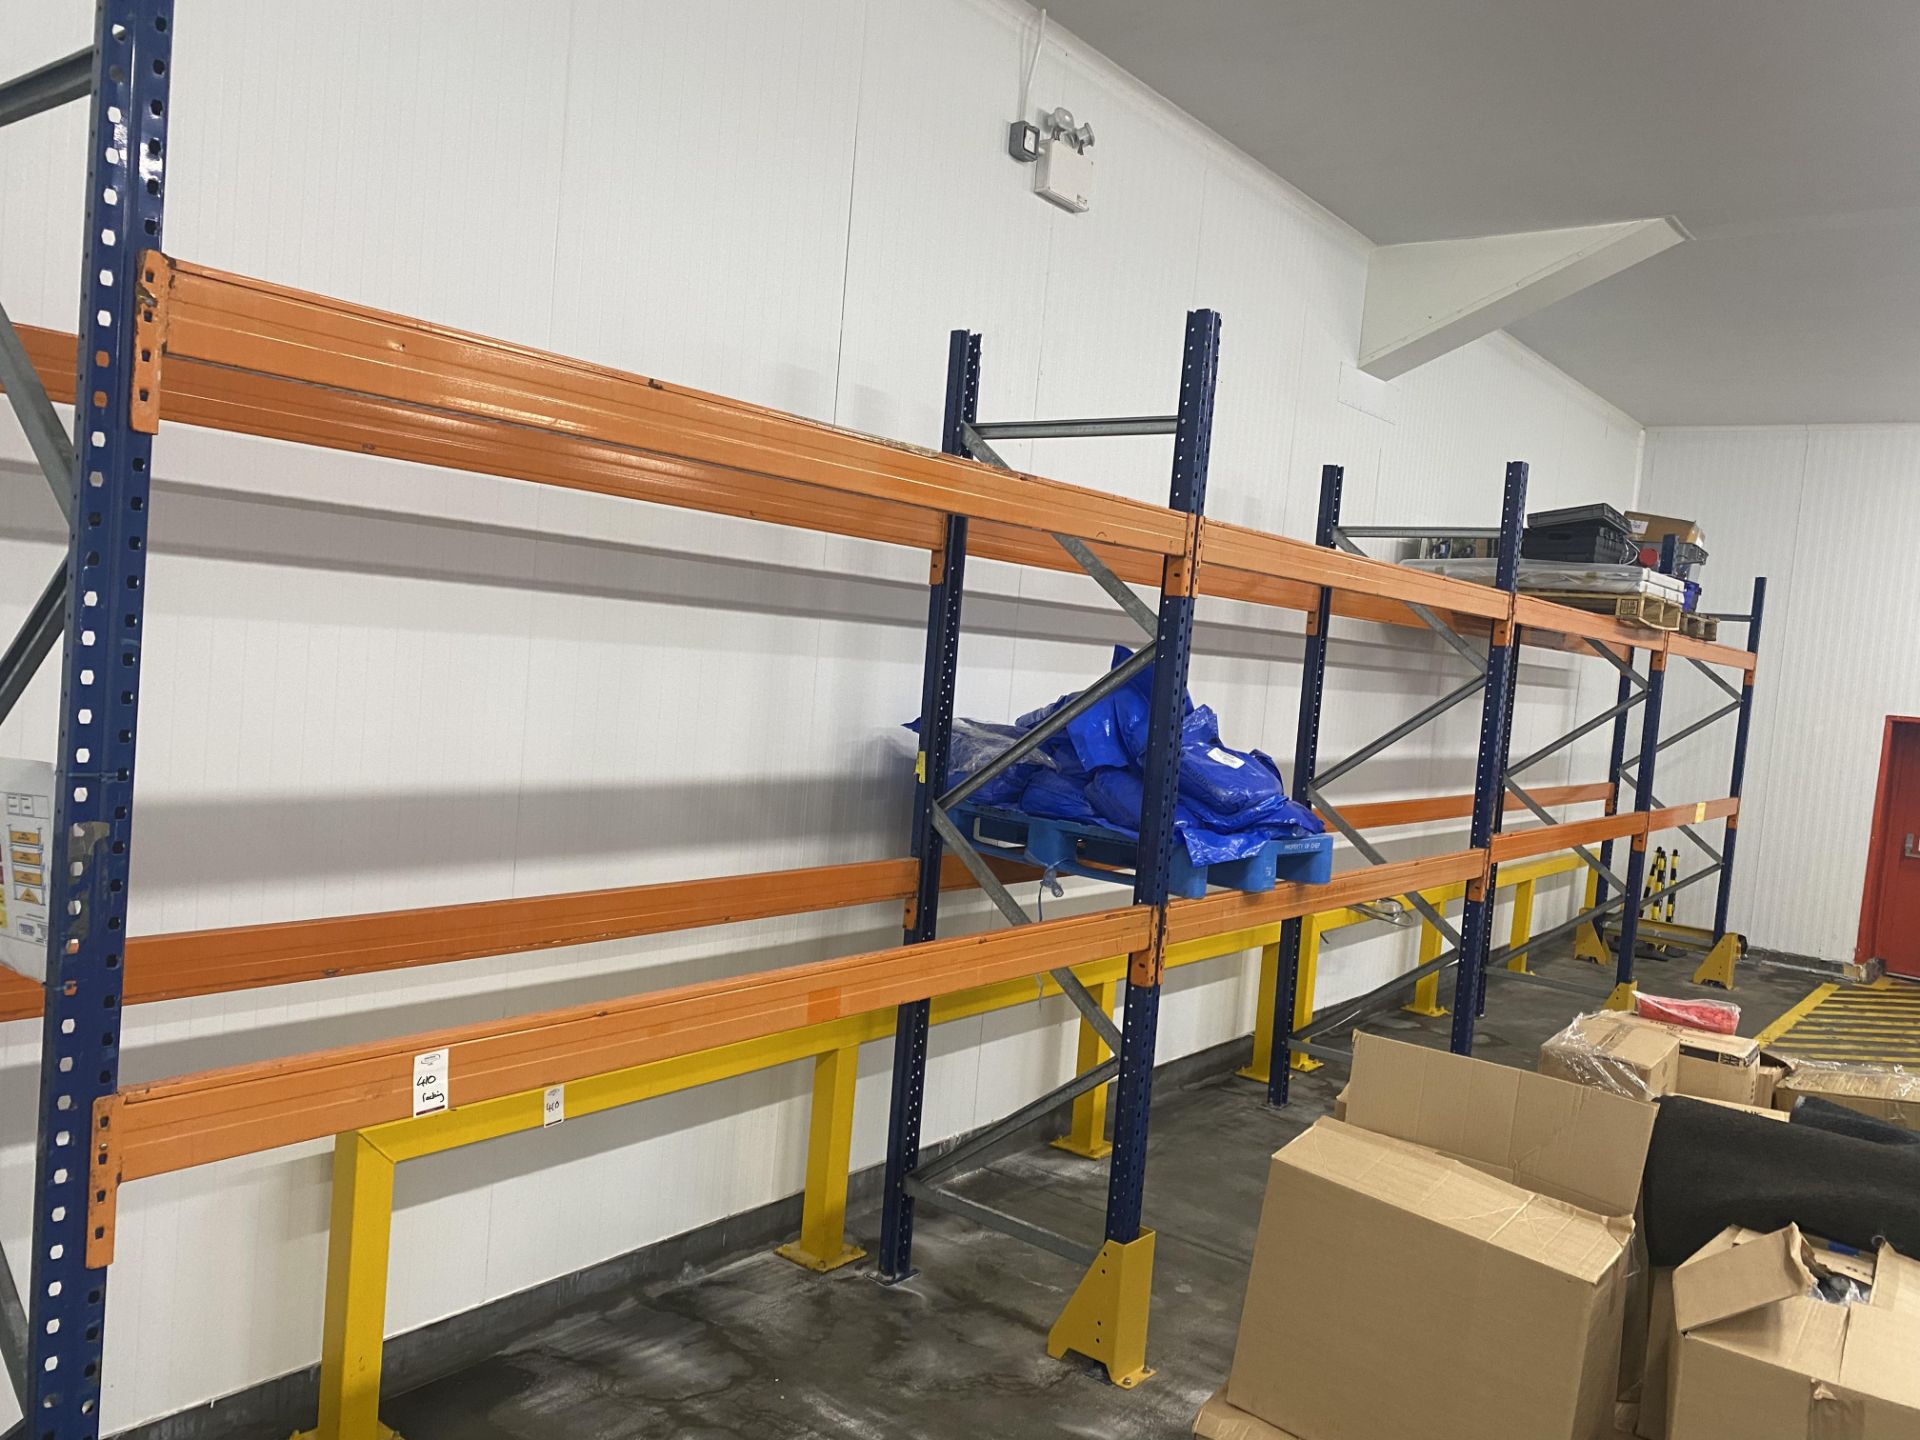 4 Bays of heavy duty racking comprising of 5 3m uprights and 16 2.7m cross beams , complete with 2